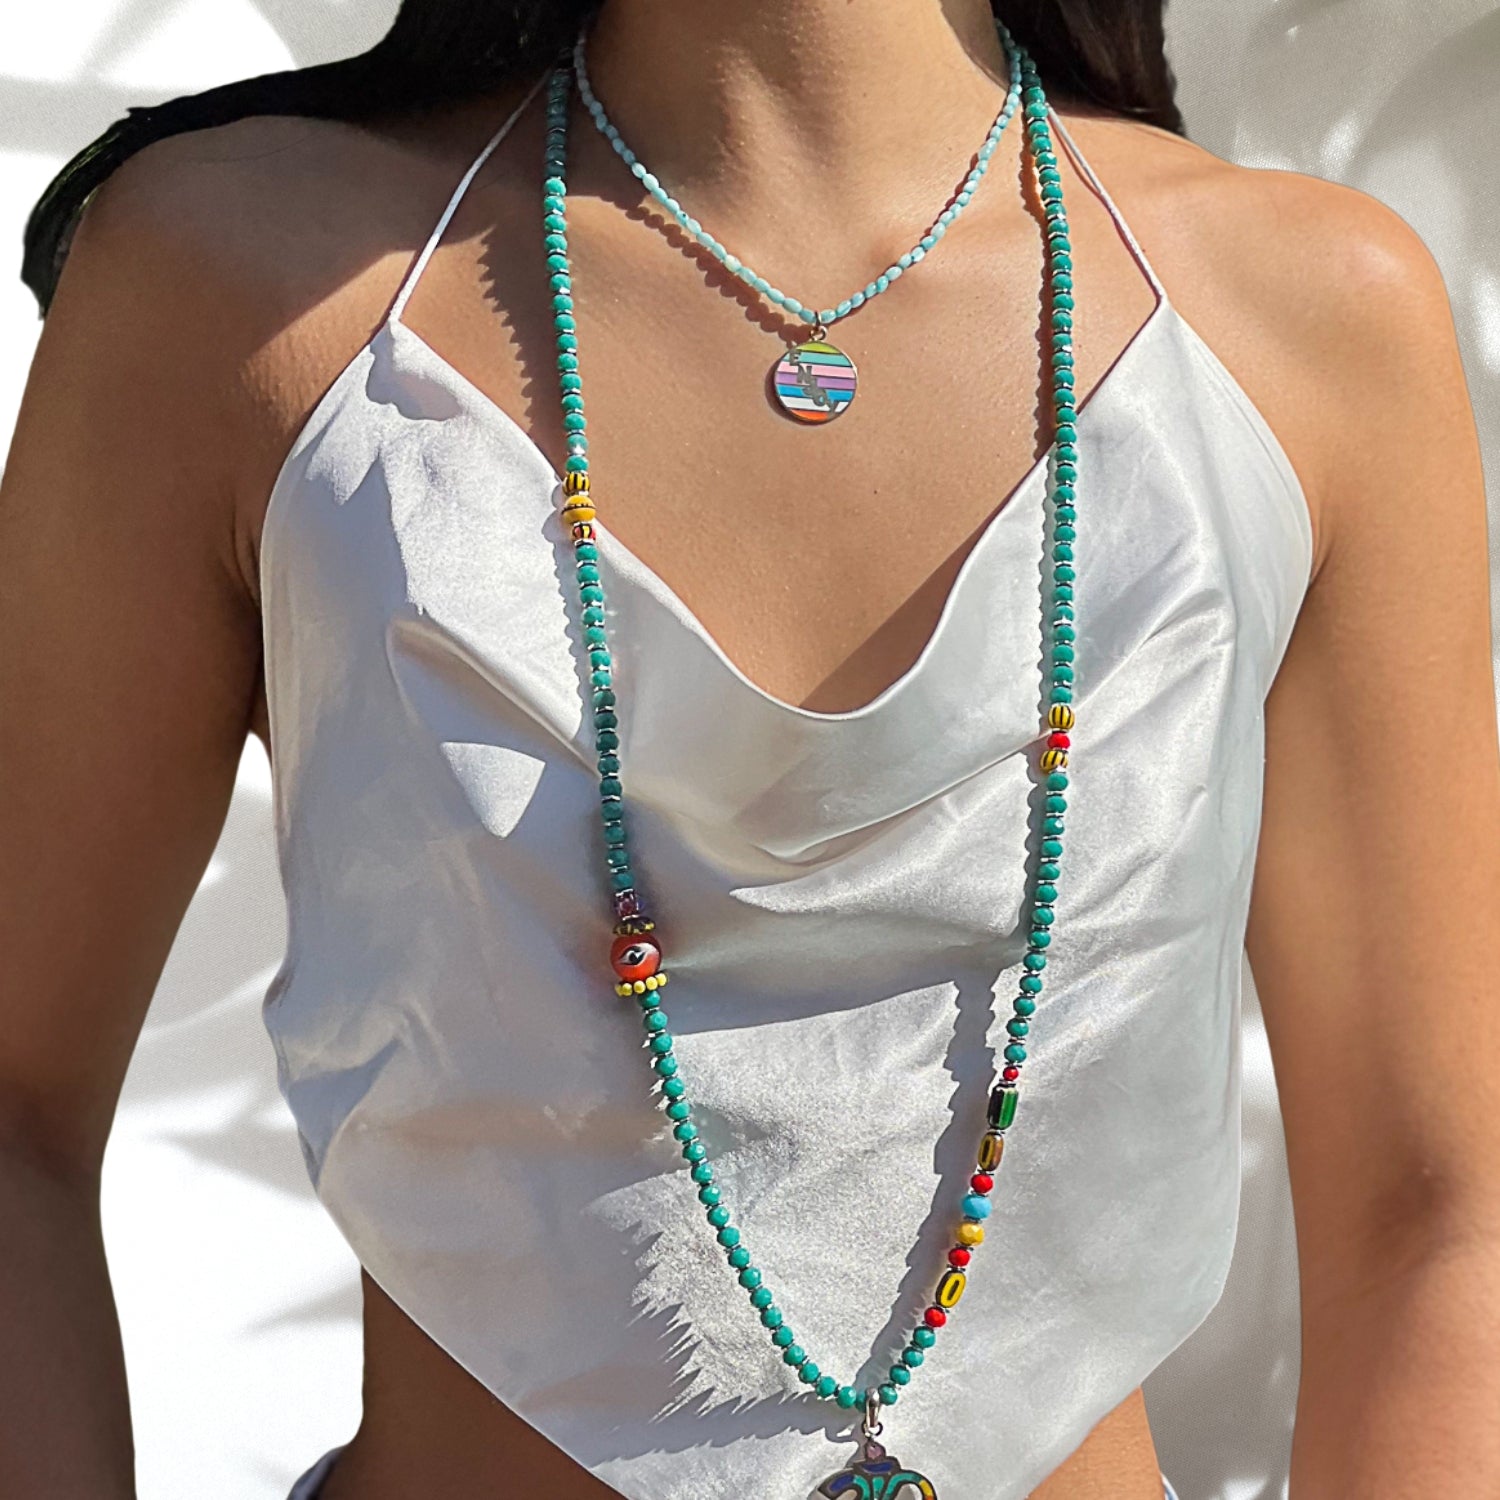 Showcasing the vibrant and meaningful Larimar Choker Enjoy Necklace on a model.